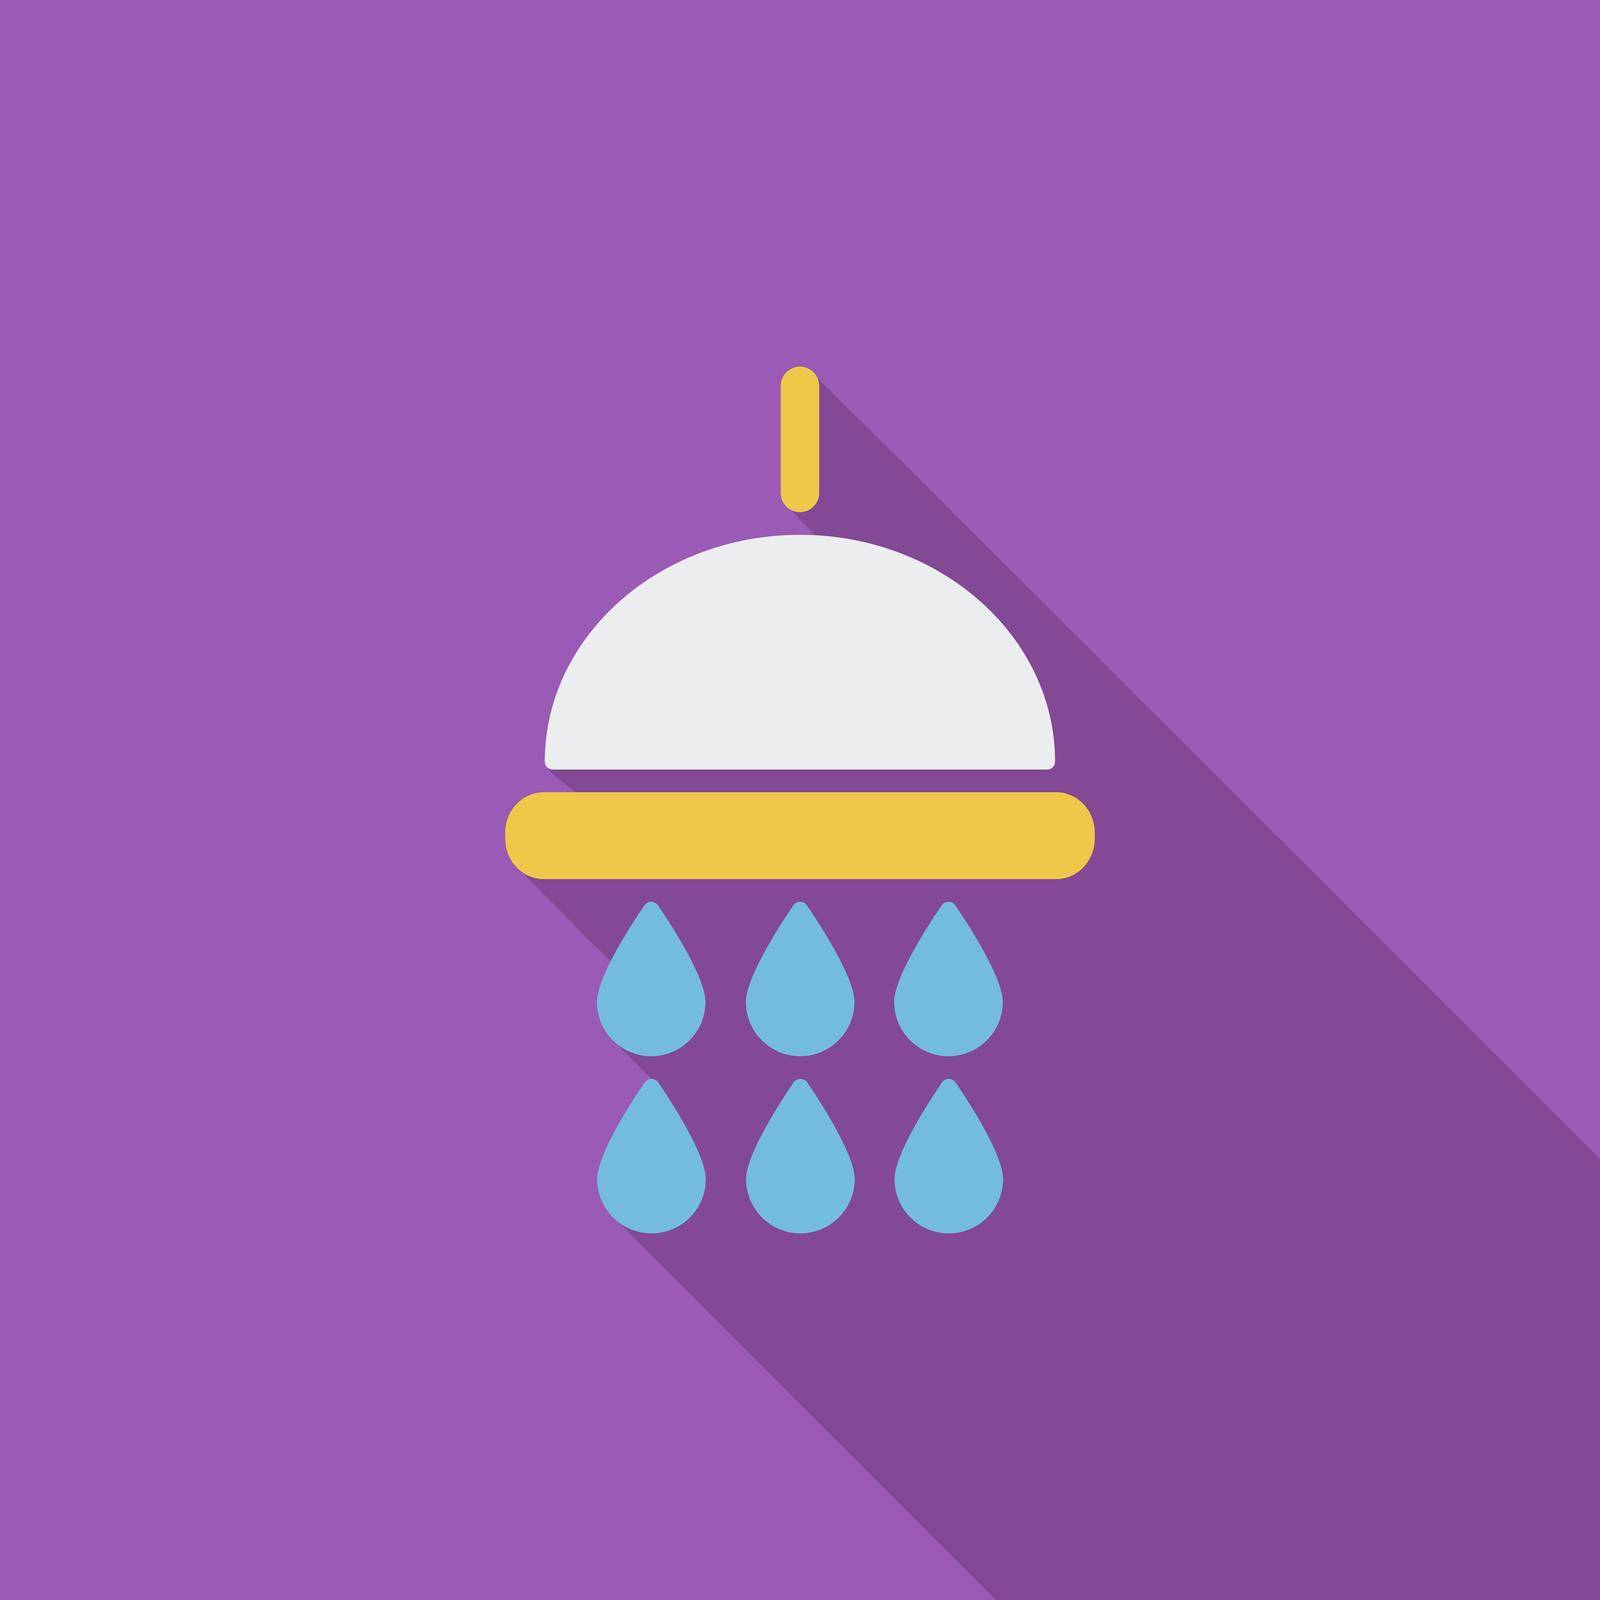 Shower icon. Flat vector related icon with long shadow for web and mobile applications. It can be used as - logo, pictogram, icon, infographic element. Vector Illustration.